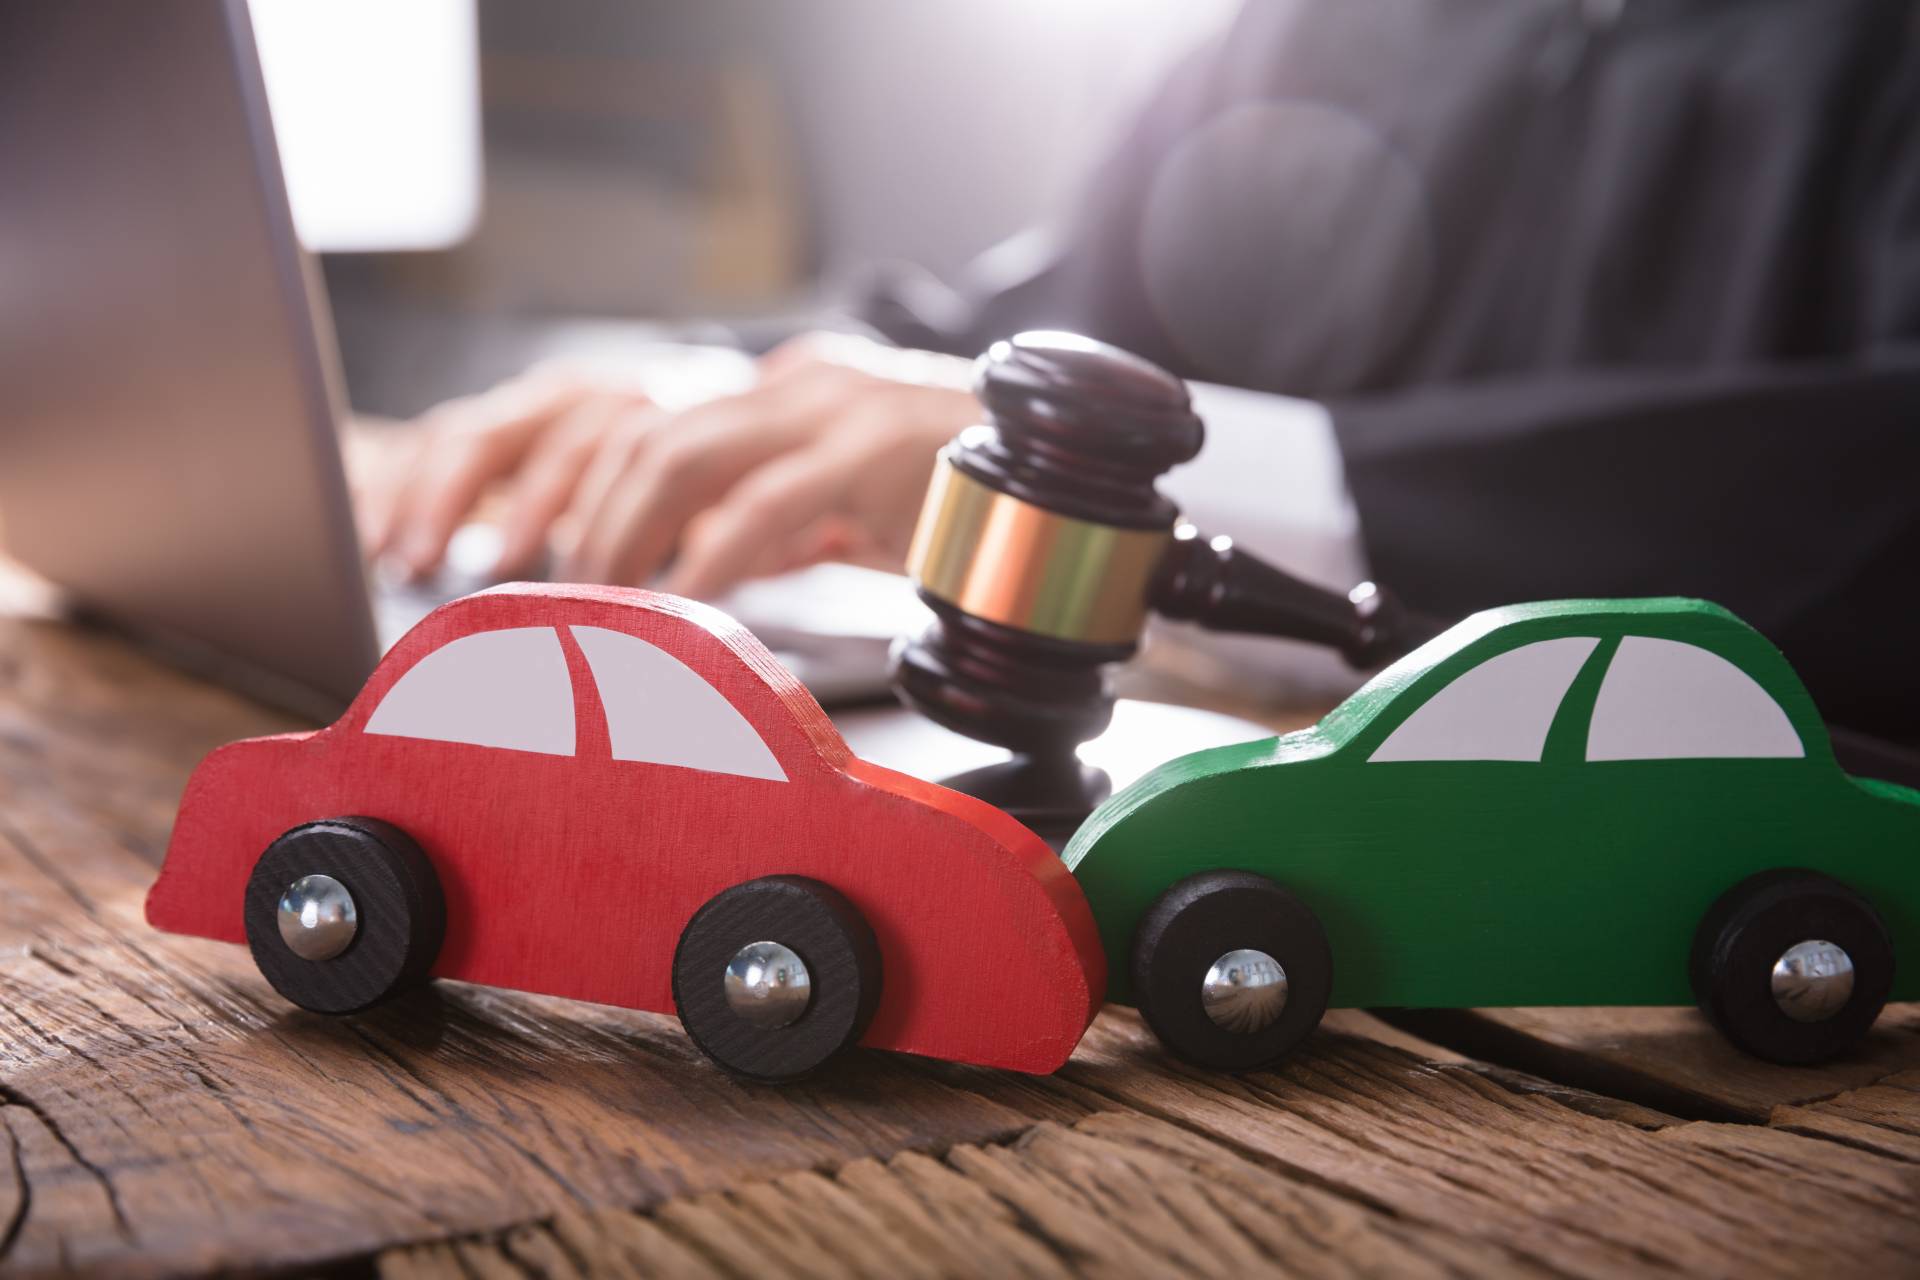 Car accident claims can be difficult to navigate, schedule a free consultation today.